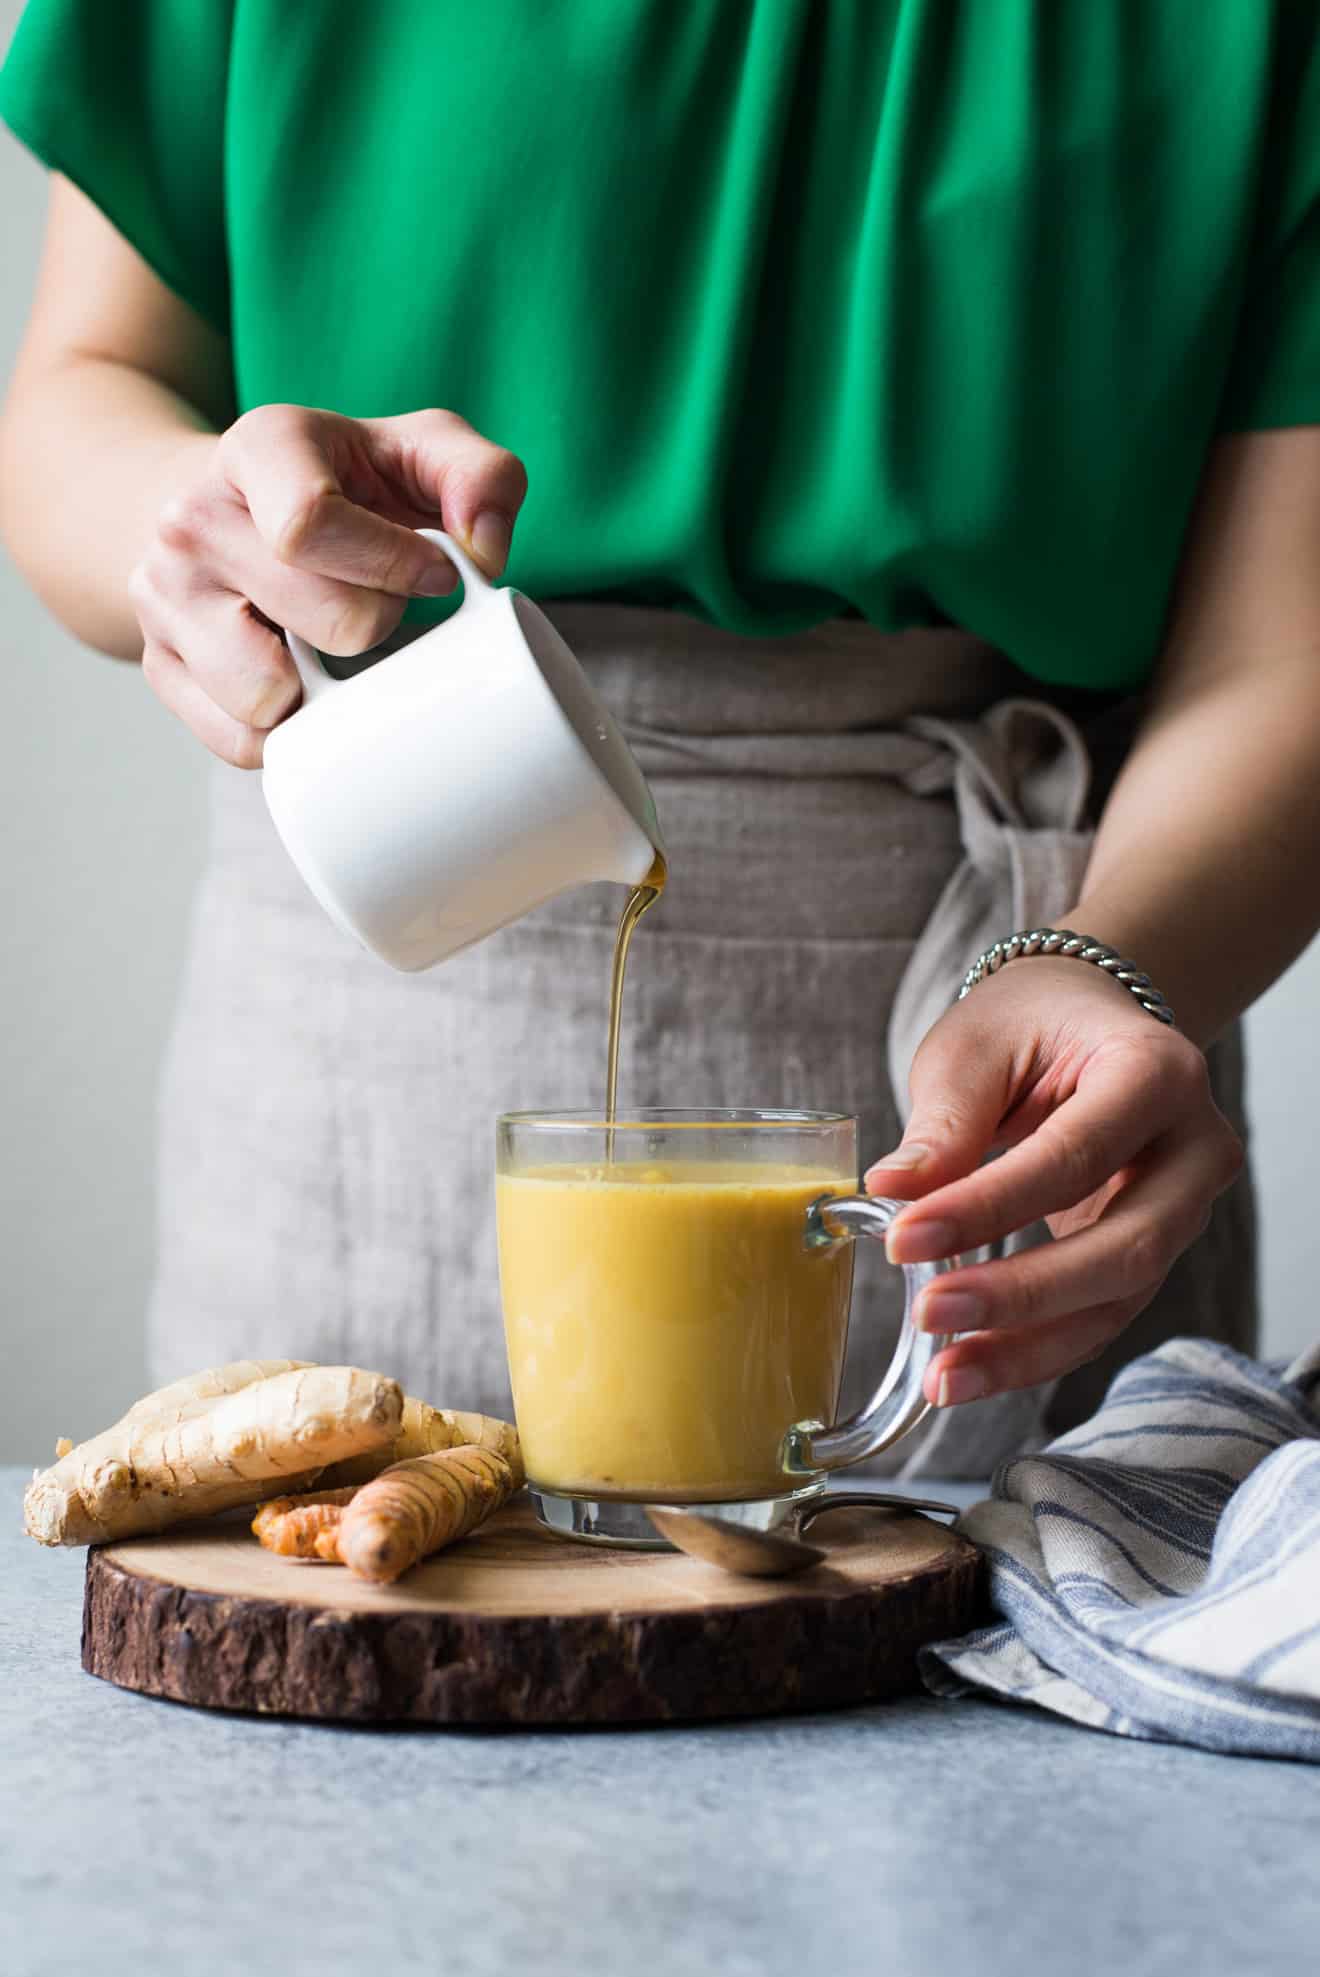 Golden Milk (or Turmeric Milk) is high in antioxidants and has anti-inflammatory properties. Making it at home is very easy. All you need is 5 basic ingredients